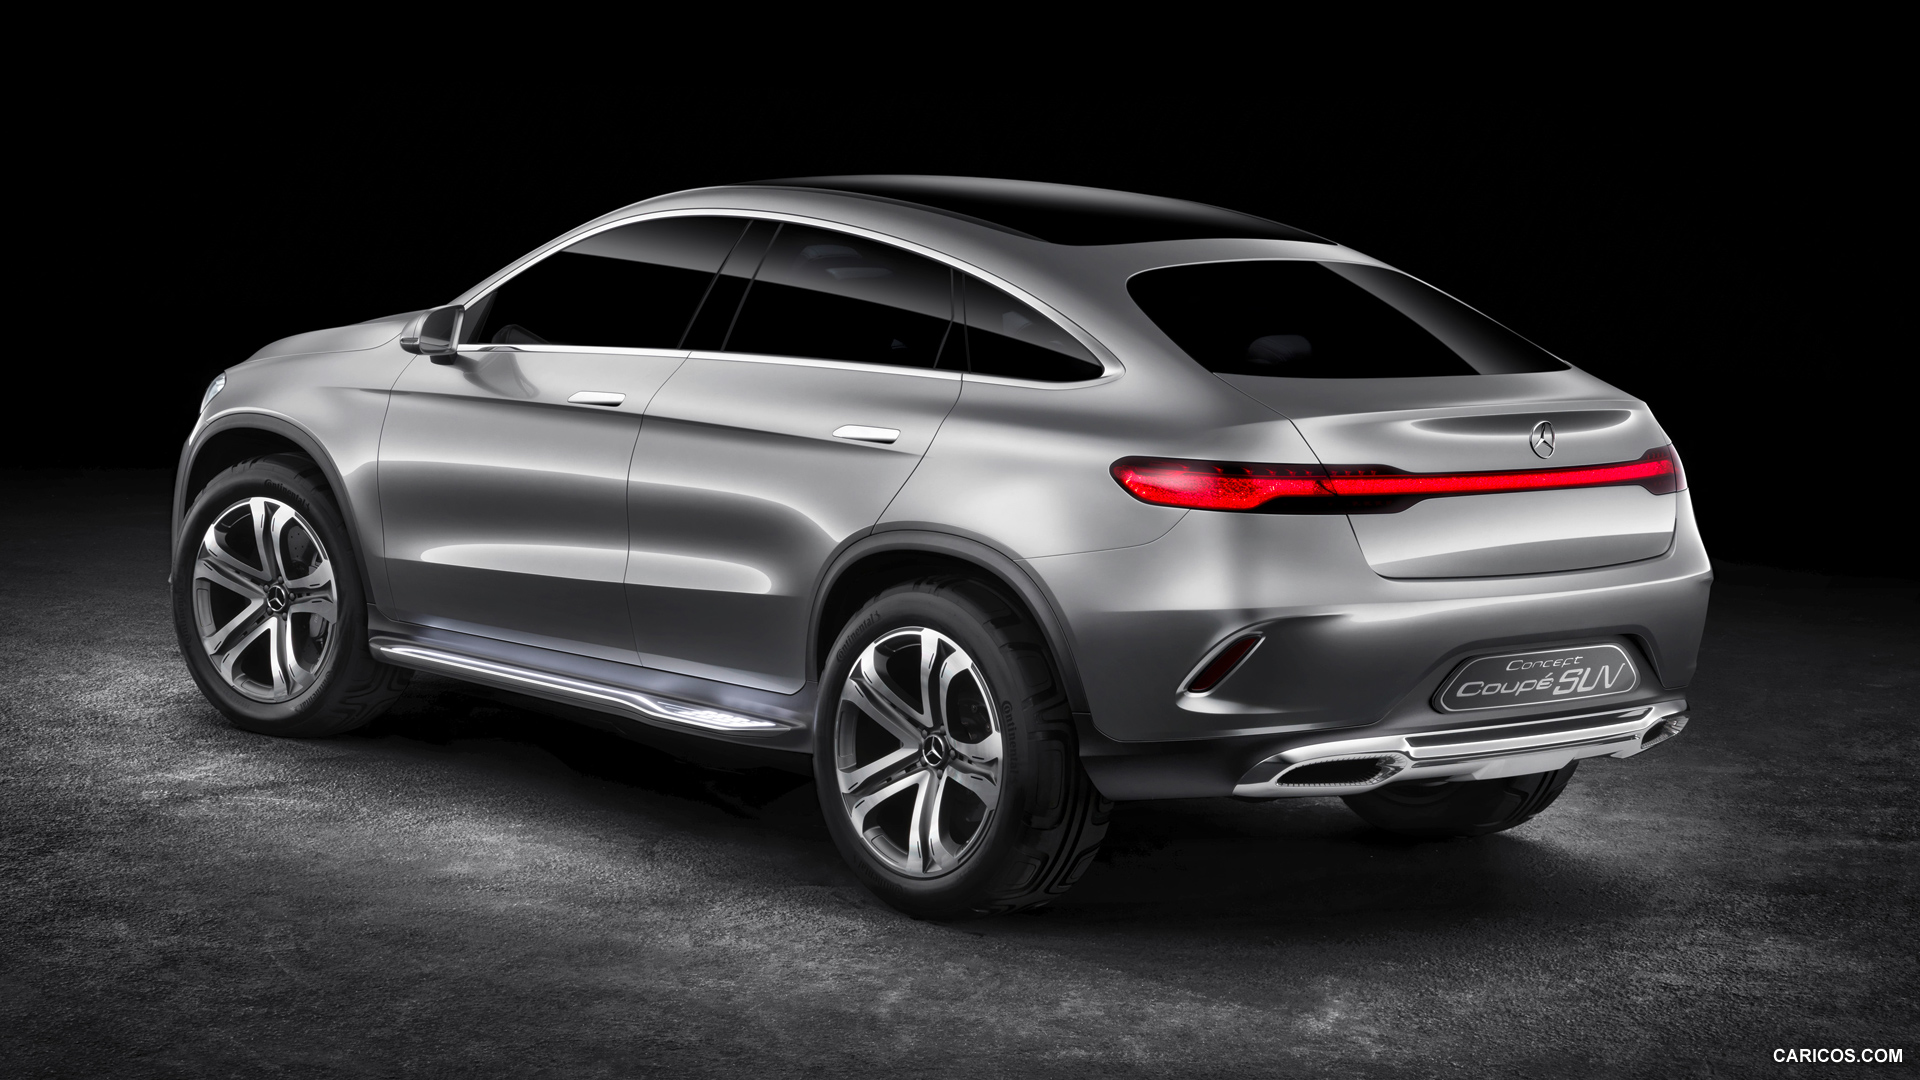 2014 Mercedes-Benz Coupe SUV Concept  - Rear, #12 of 17